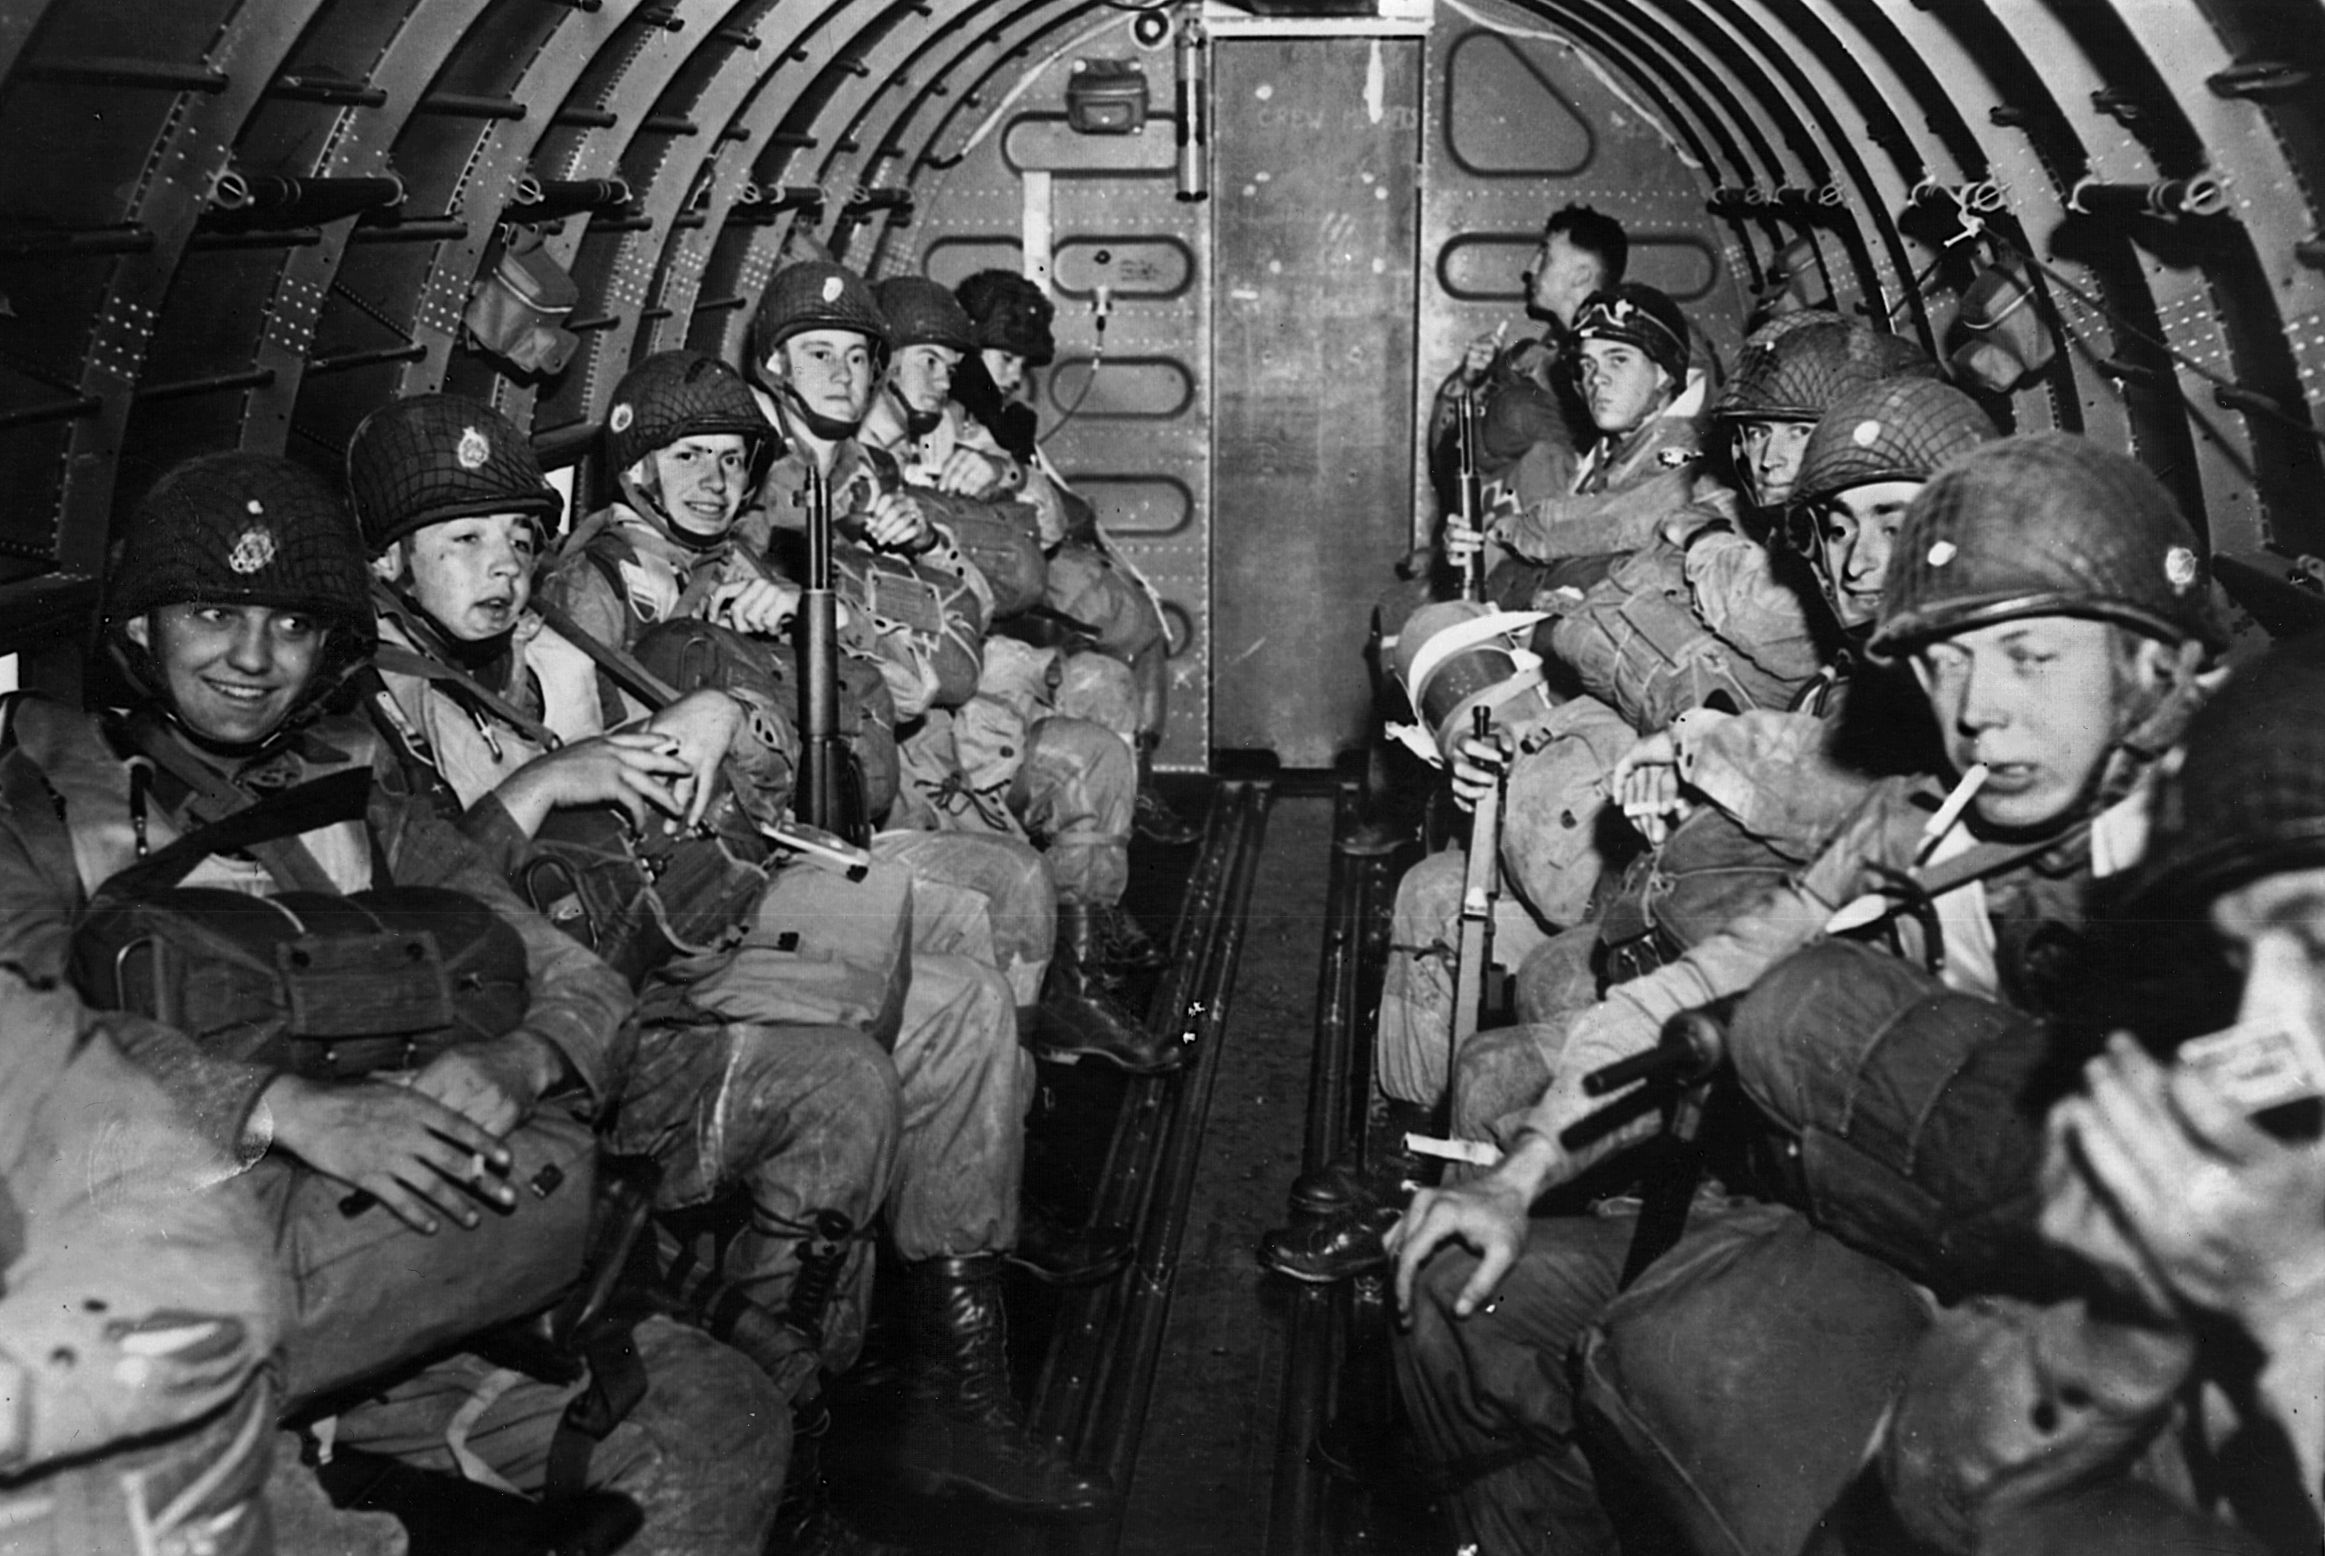 Their faces displaying a variety of emotions, these paratroopers from the 101st Airborne prepare to take off in a C-47 “Skytrain” on D-Day. 